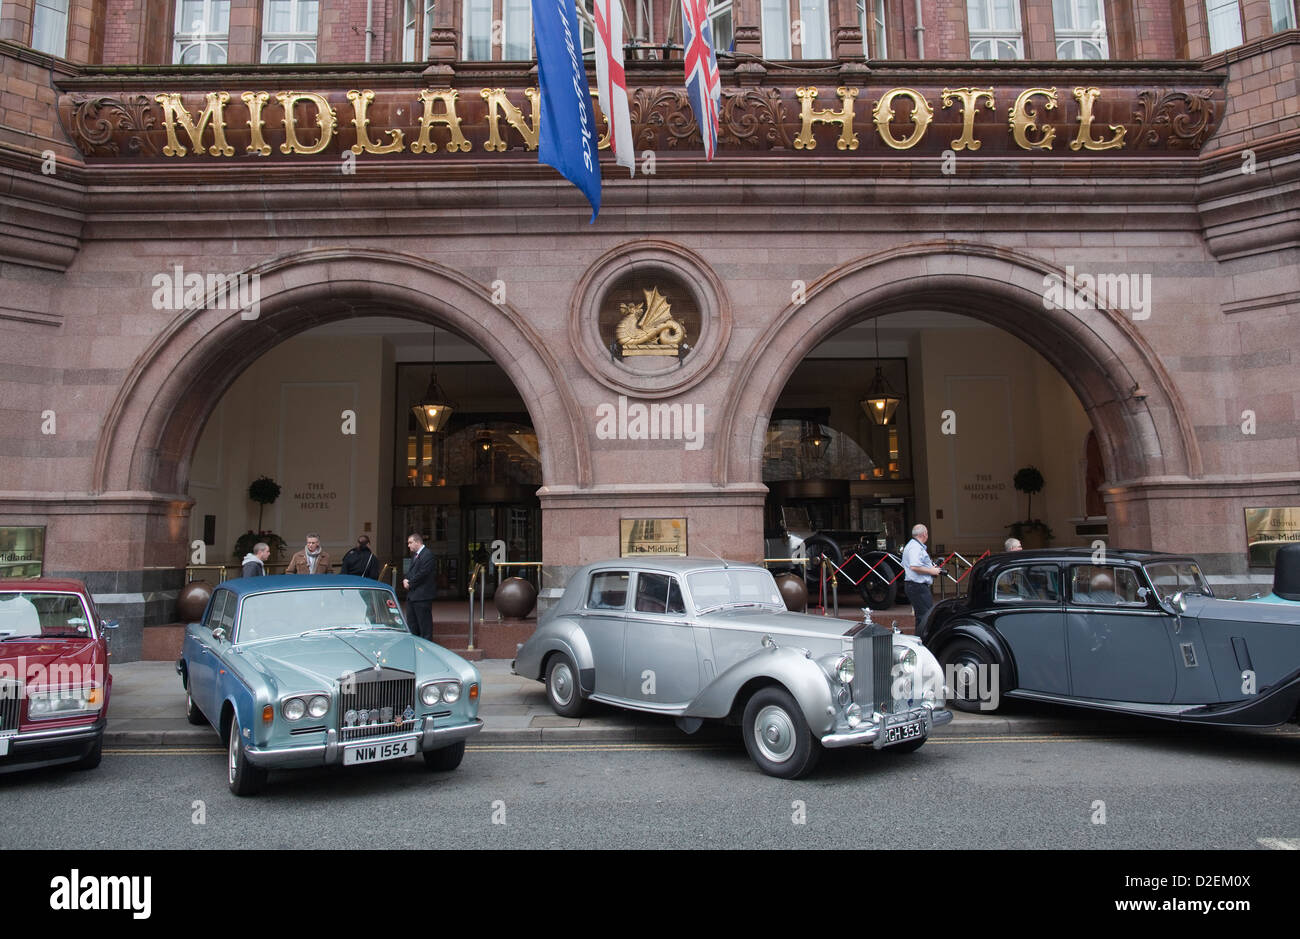 Rolls Royce car outside Manchester Midland Hotel birthplace of the company Stock Photo